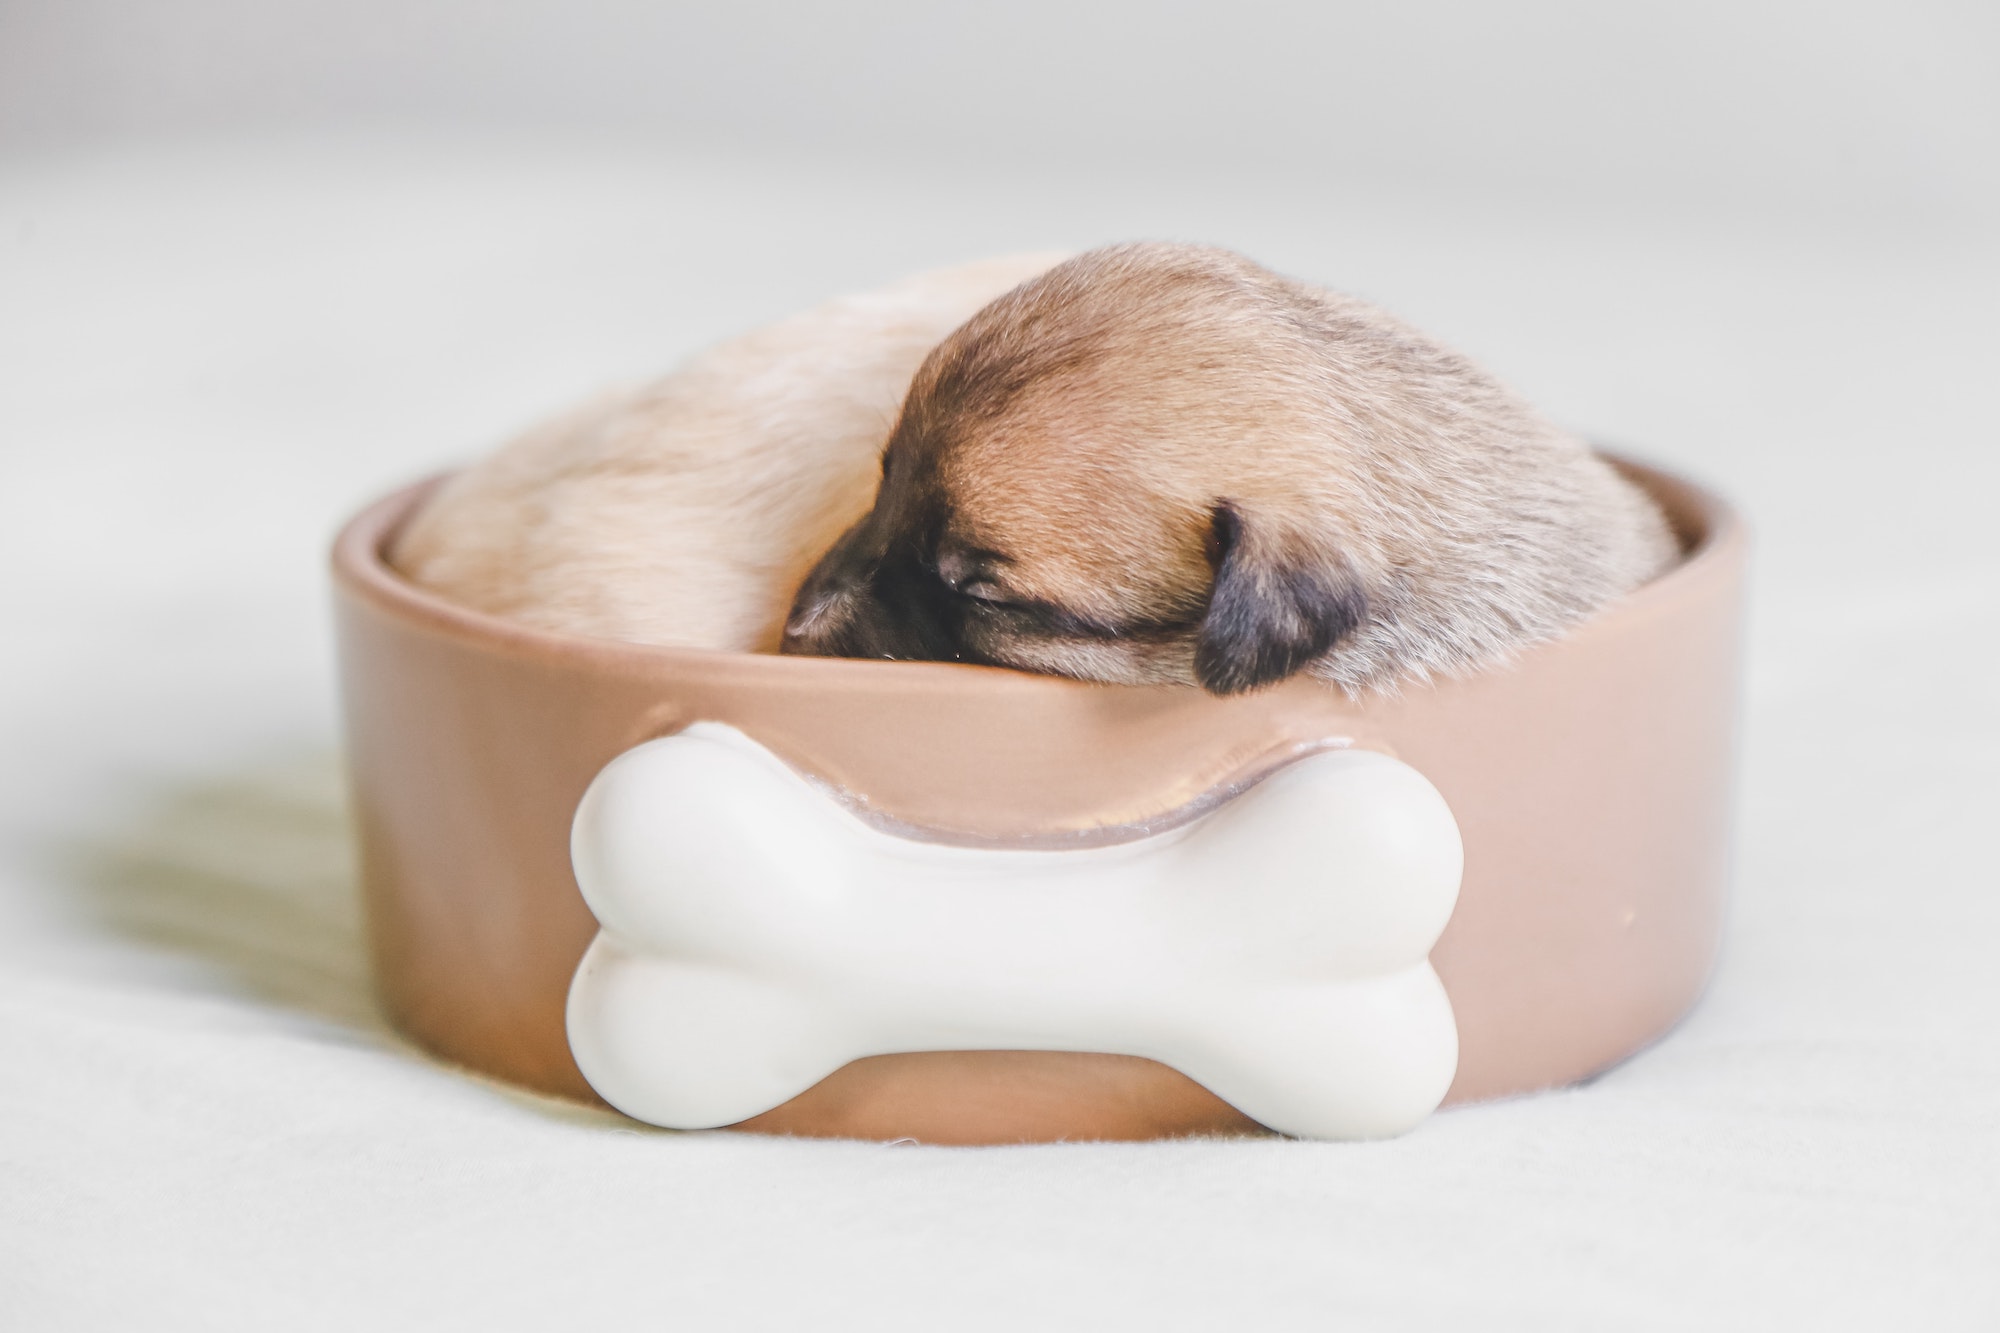 how long should a puppy sleep for